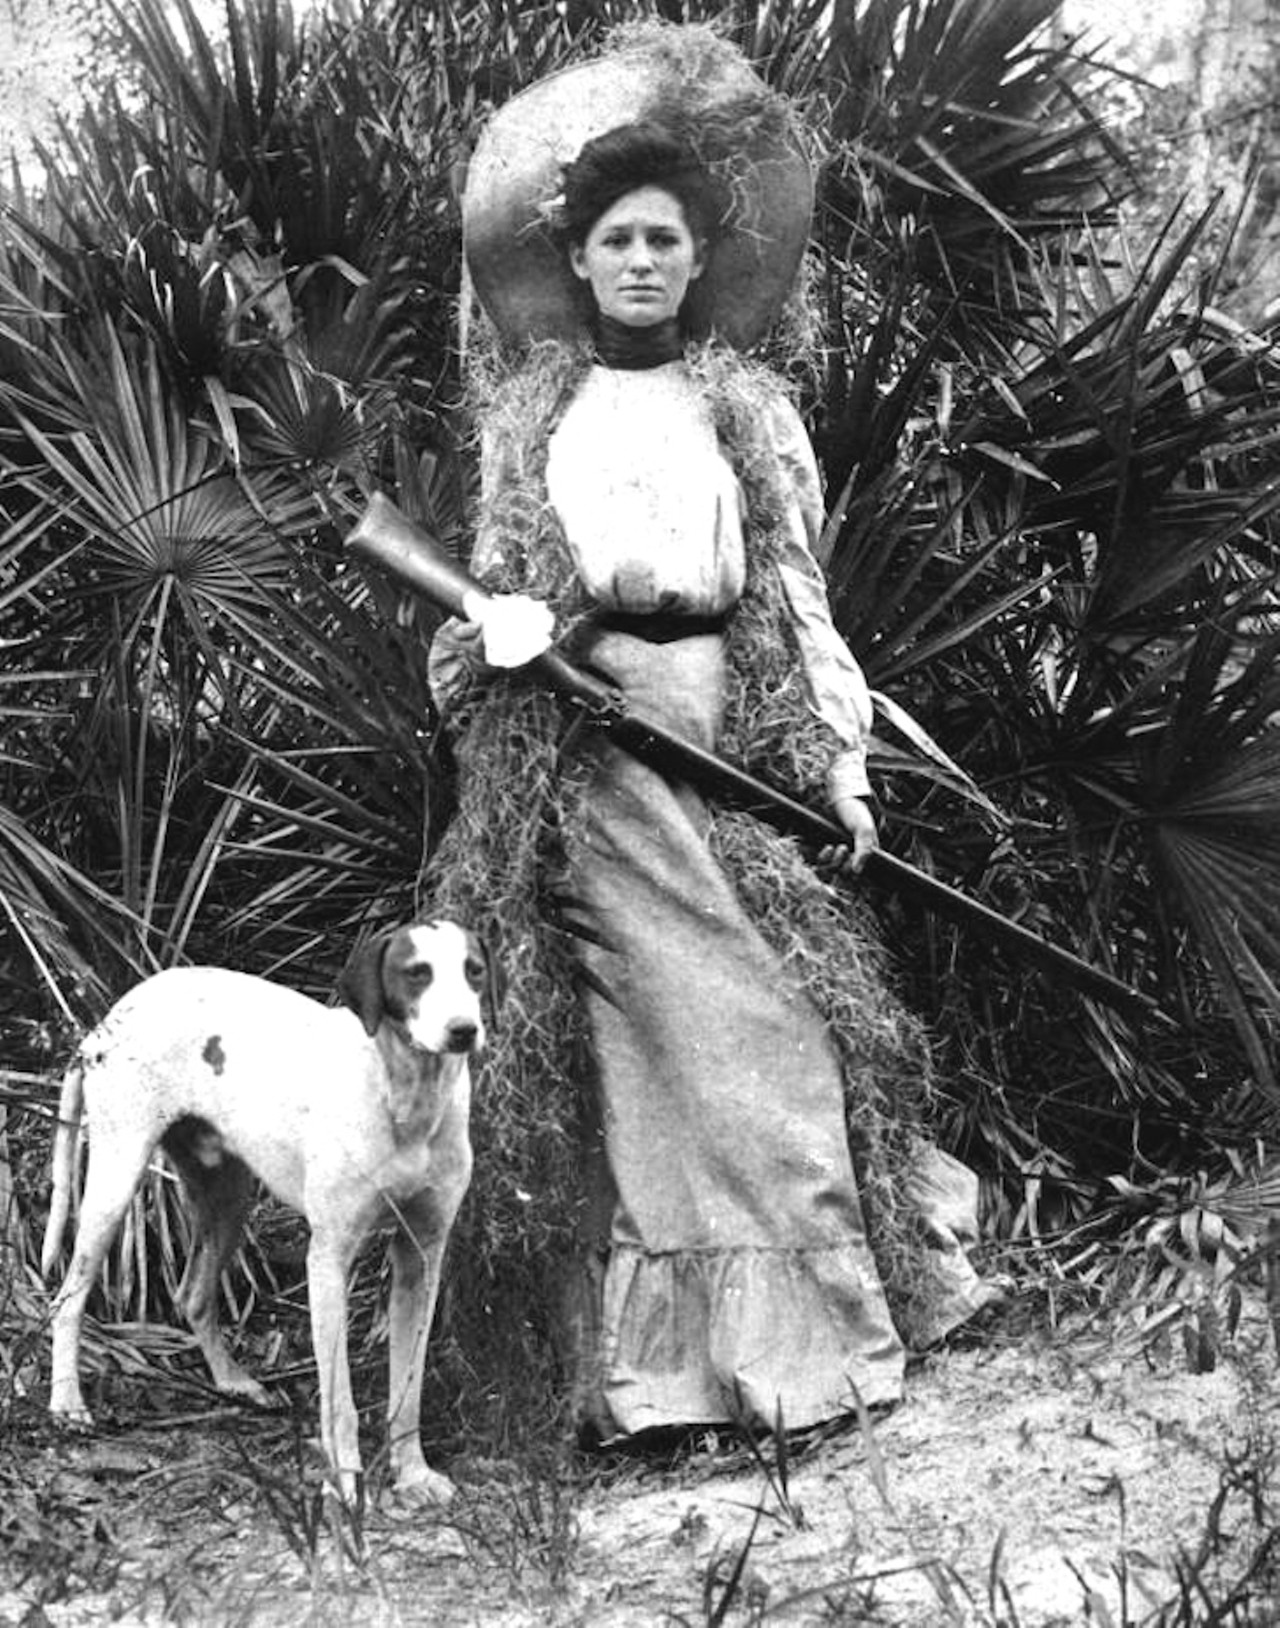 Woman with rifle and dog, taken in the 1910s.